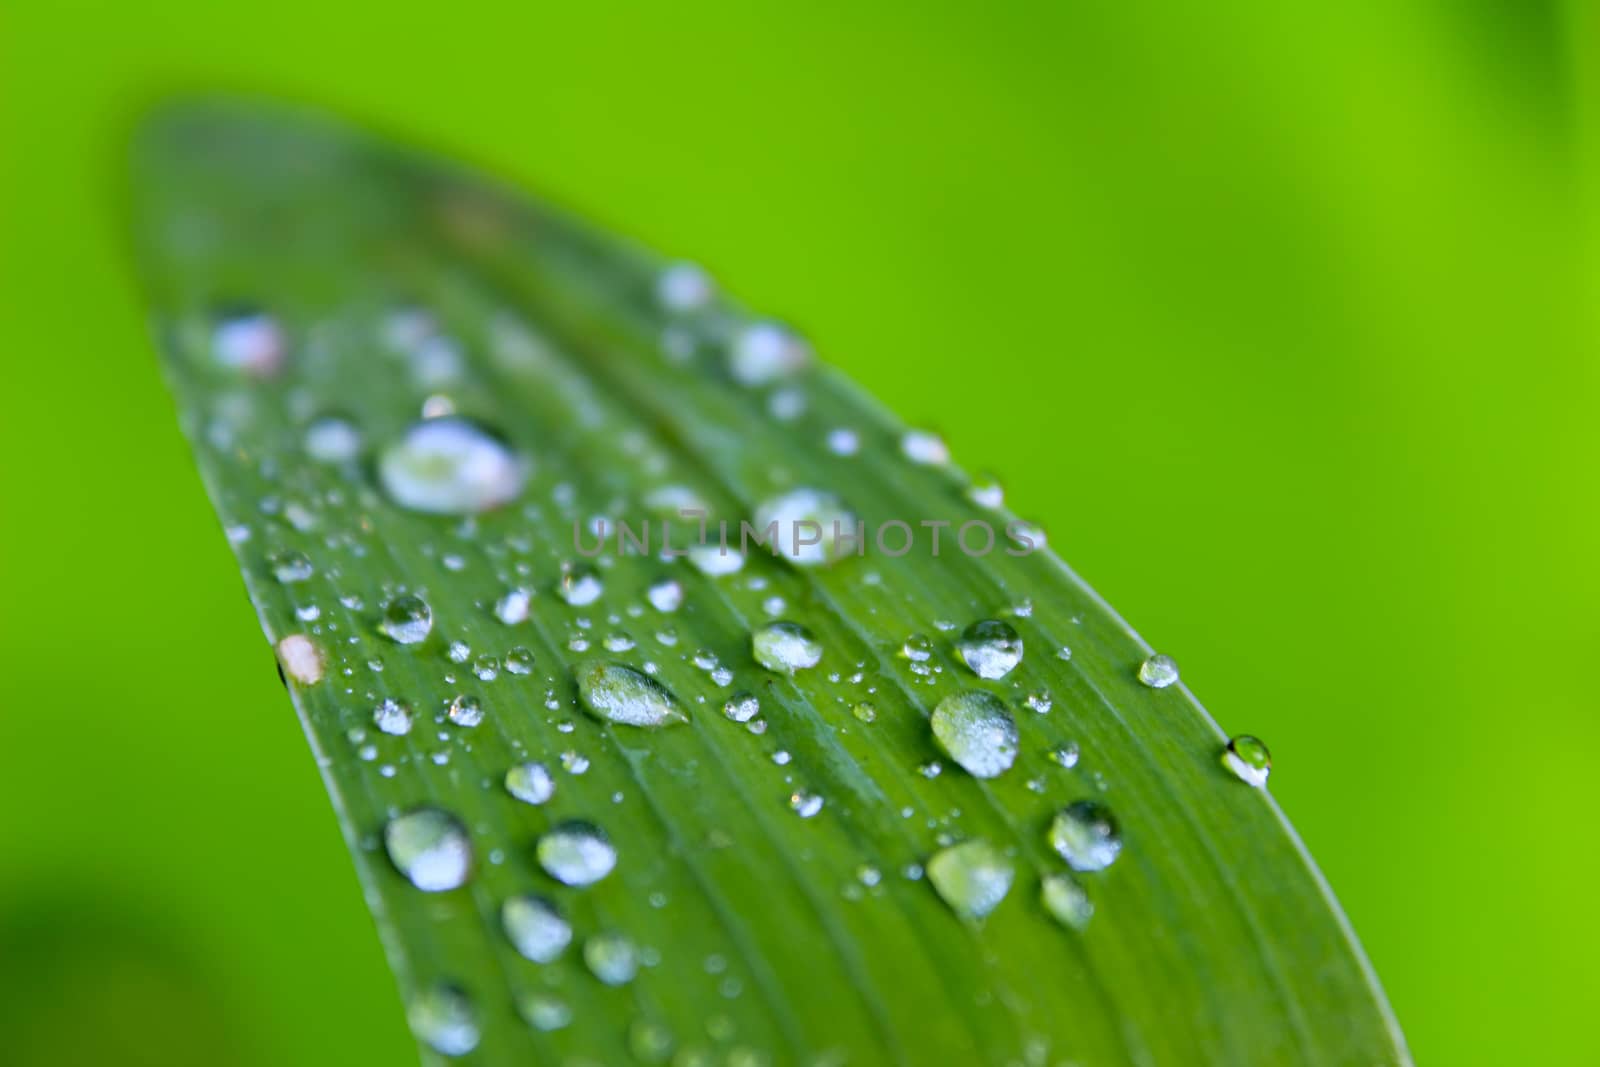 dew drops on leaves